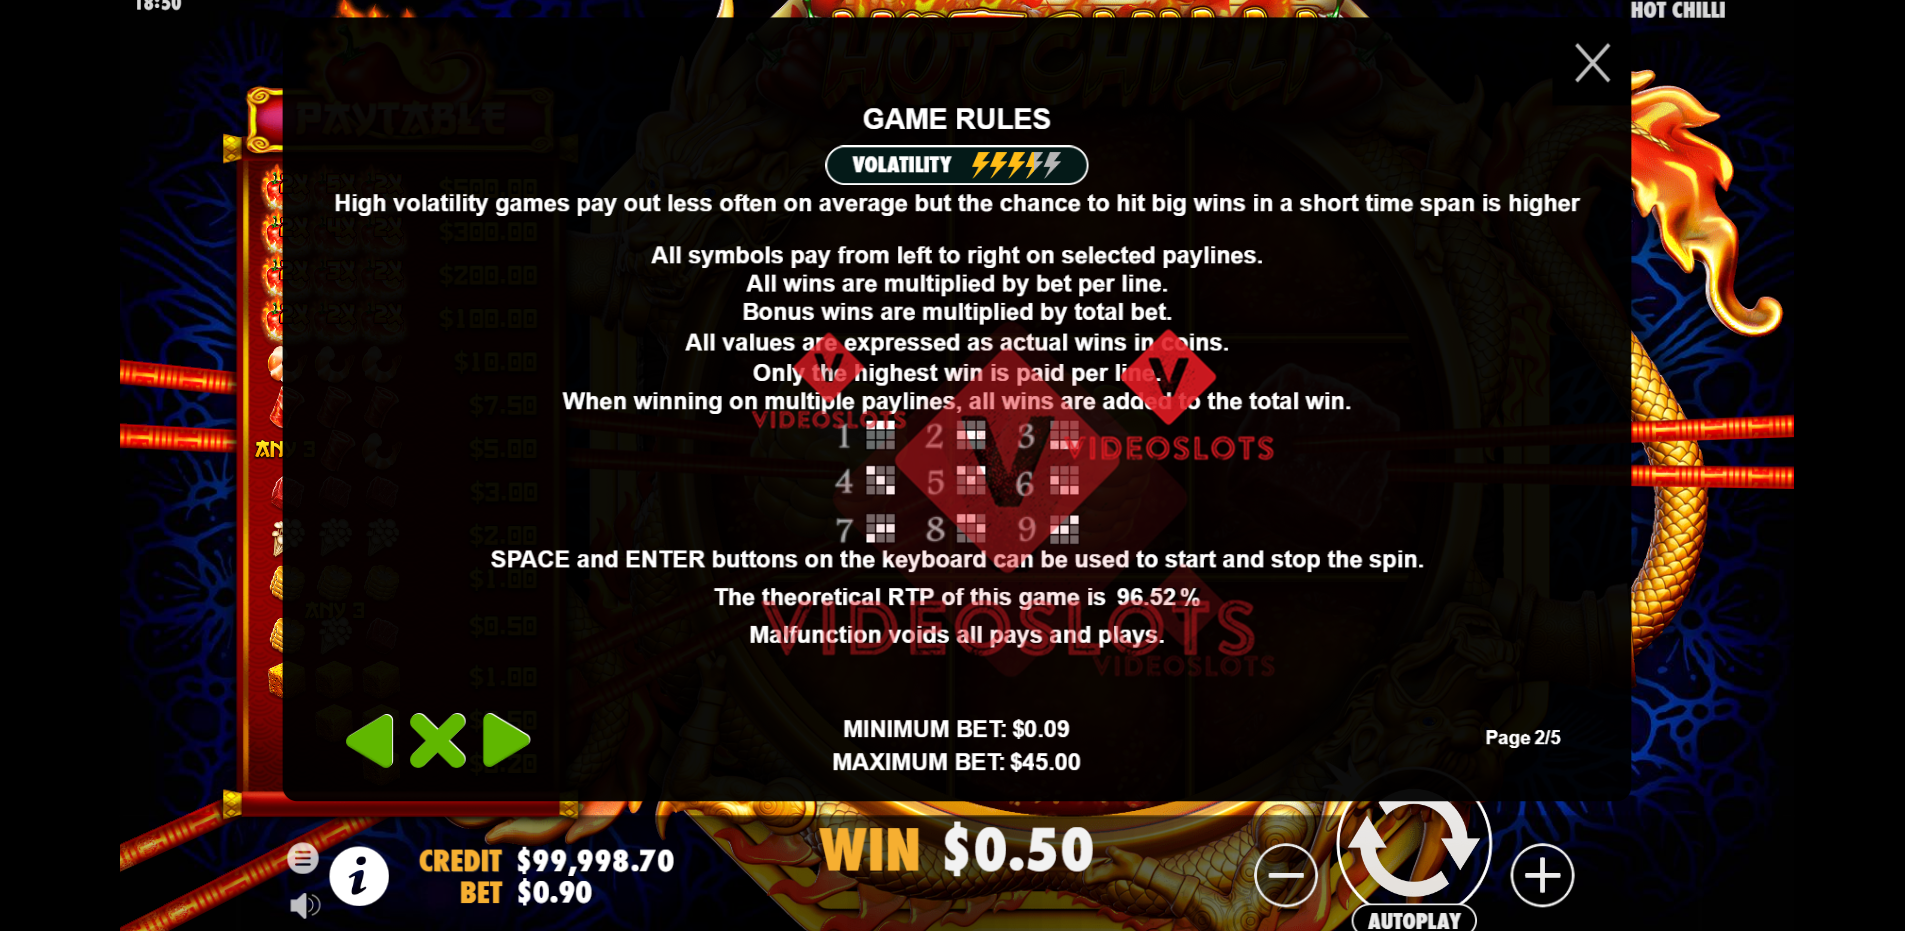 Game Rules for Hot Chilli slot by Pragmatic Play